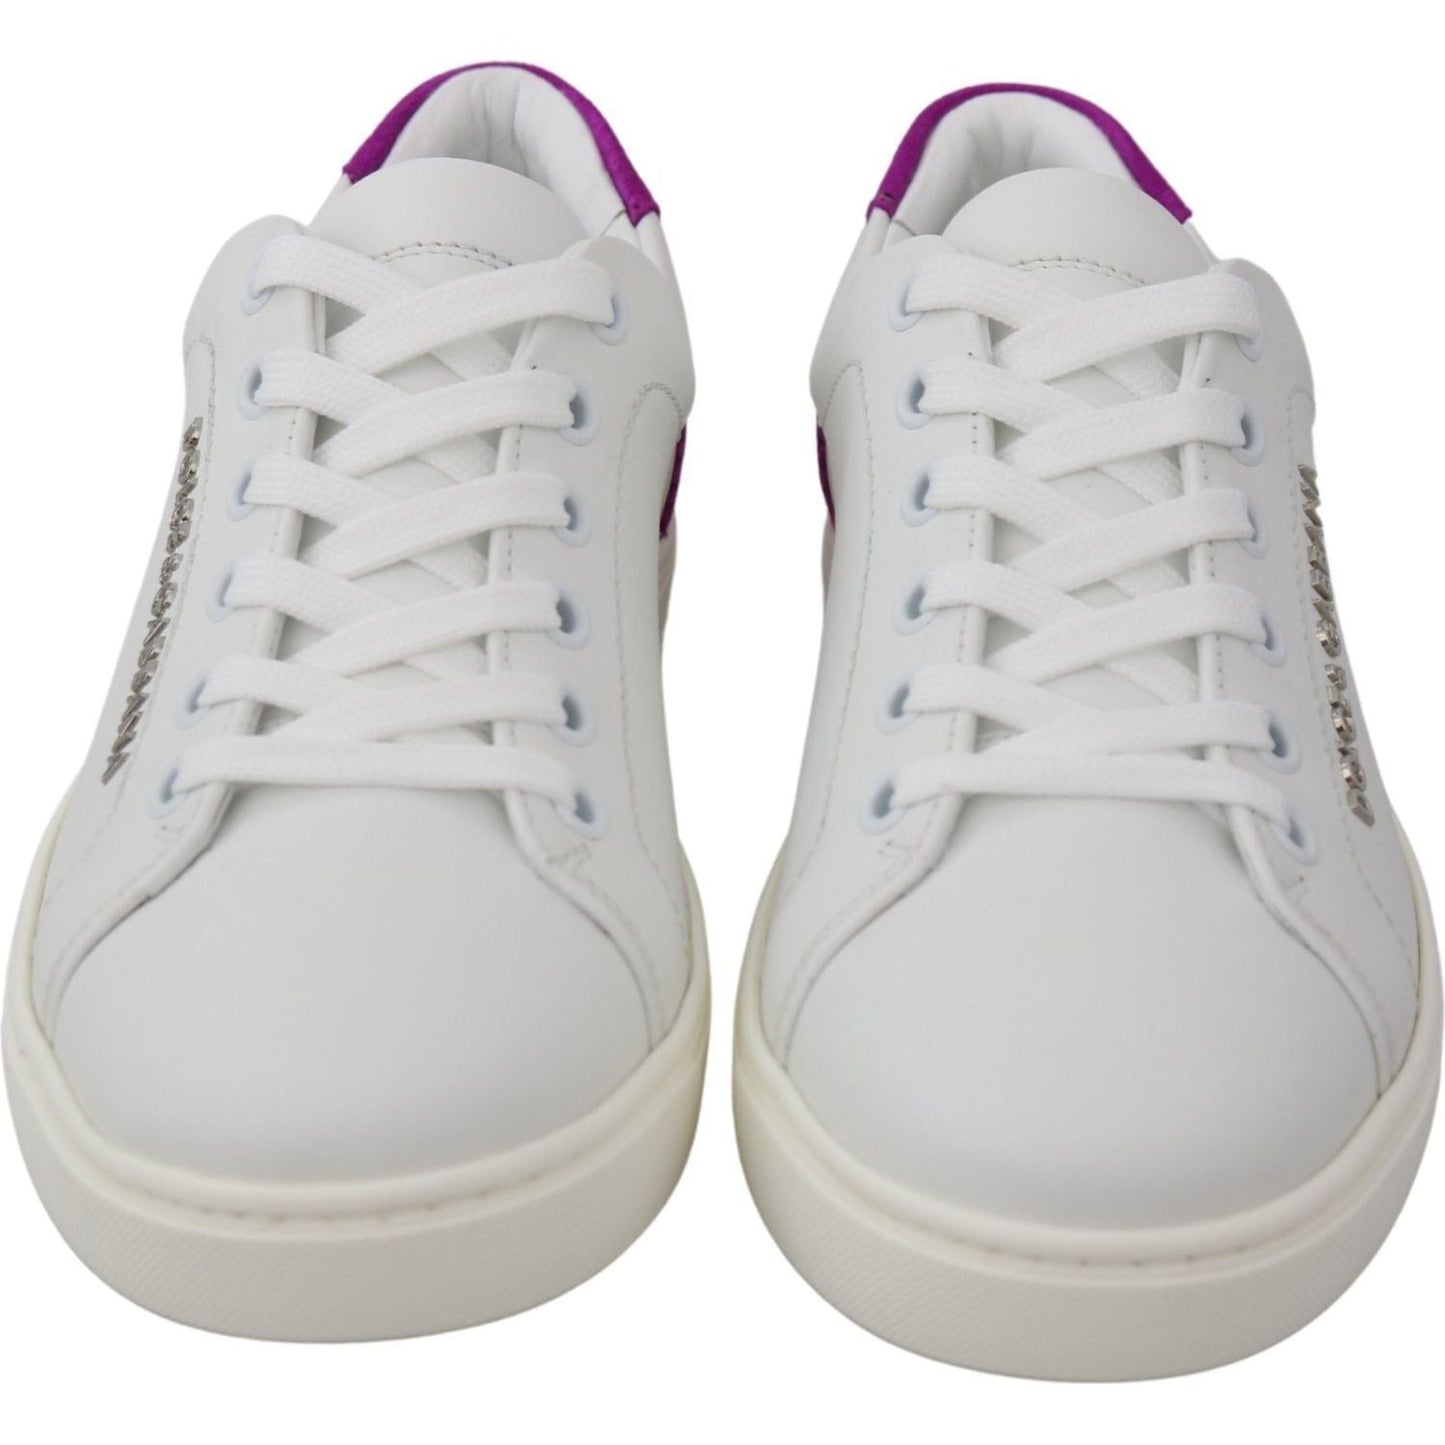 Dolce & Gabbana Chic White Leather Sneakers with Purple Accents WOMAN SNEAKERS white-purple-leather-logo-womens-shoes IMG_9743-43d875da-4eb.jpg